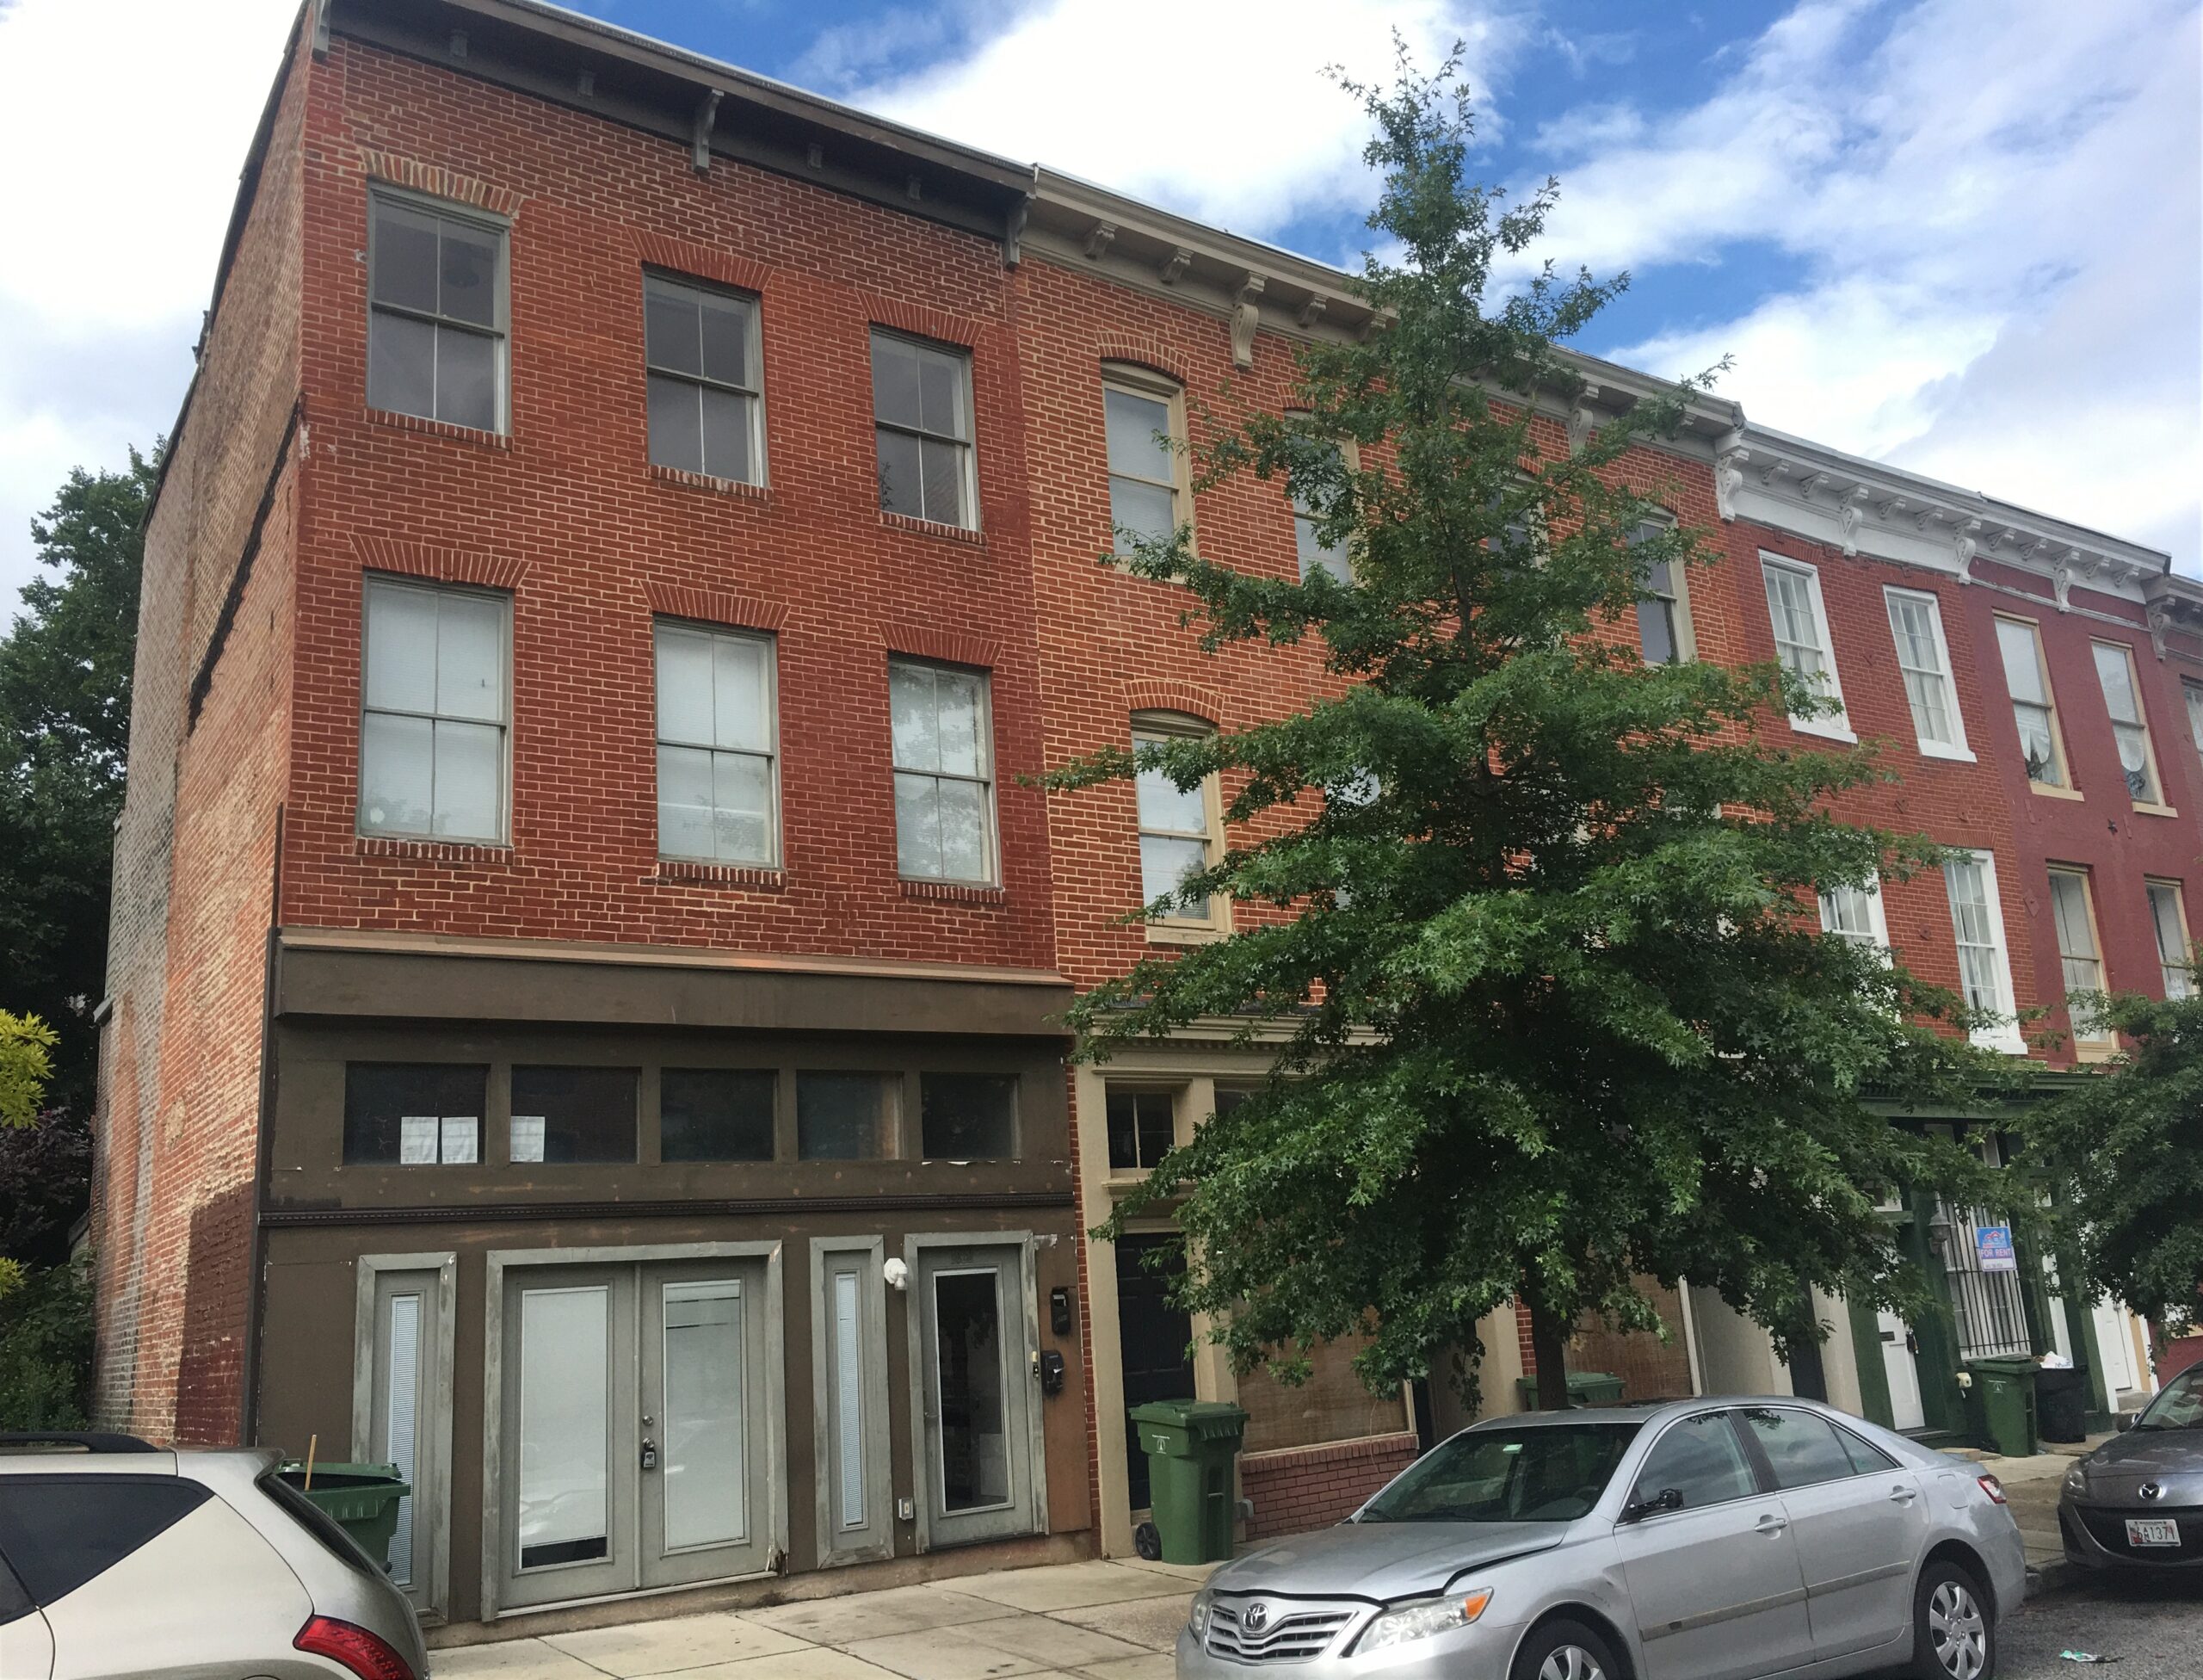 1030 Hollins Street 2 Apartments 1 Retail Space Hollins Market District Value Add  Opportunity!